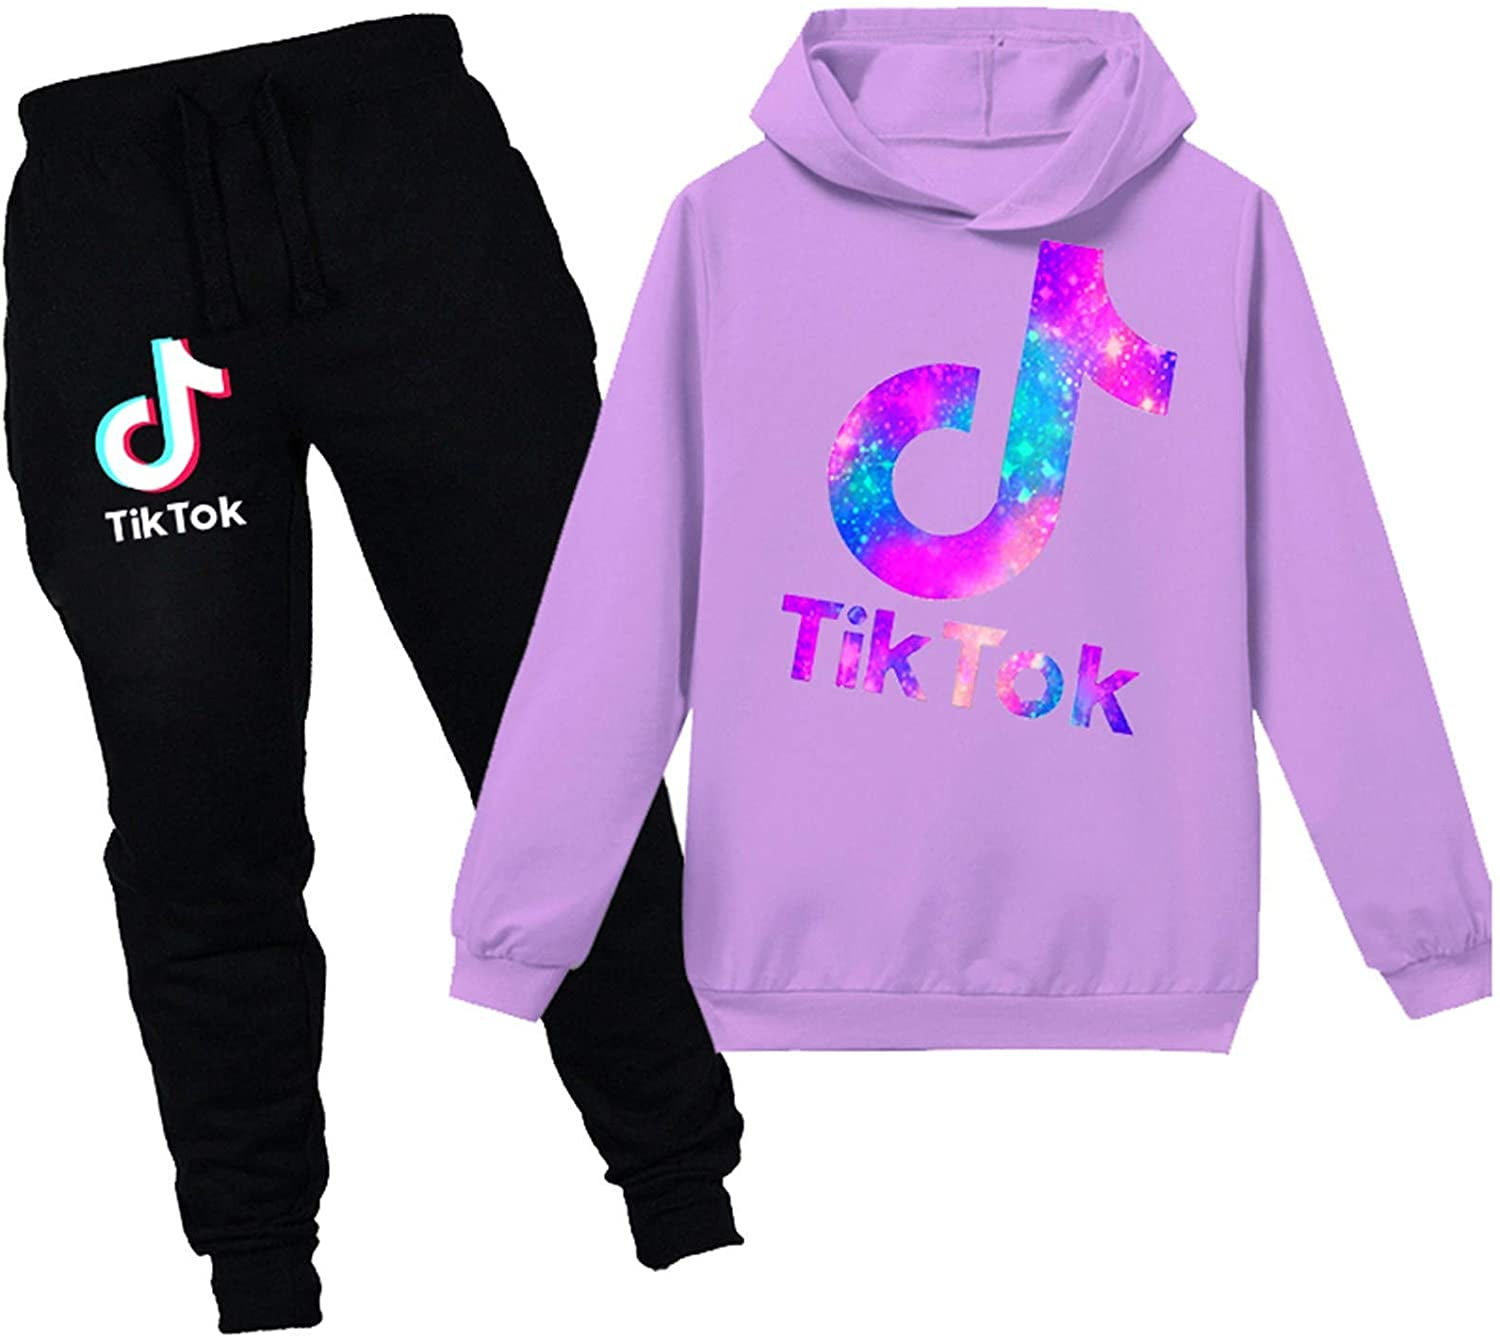 Boys Girls TIK Tok Pull Over Long Sleeve Hoodies and Sweatpants Set-Graphic Hooded Sweatshirts Set for Kids 2T-14Y,9 Colors